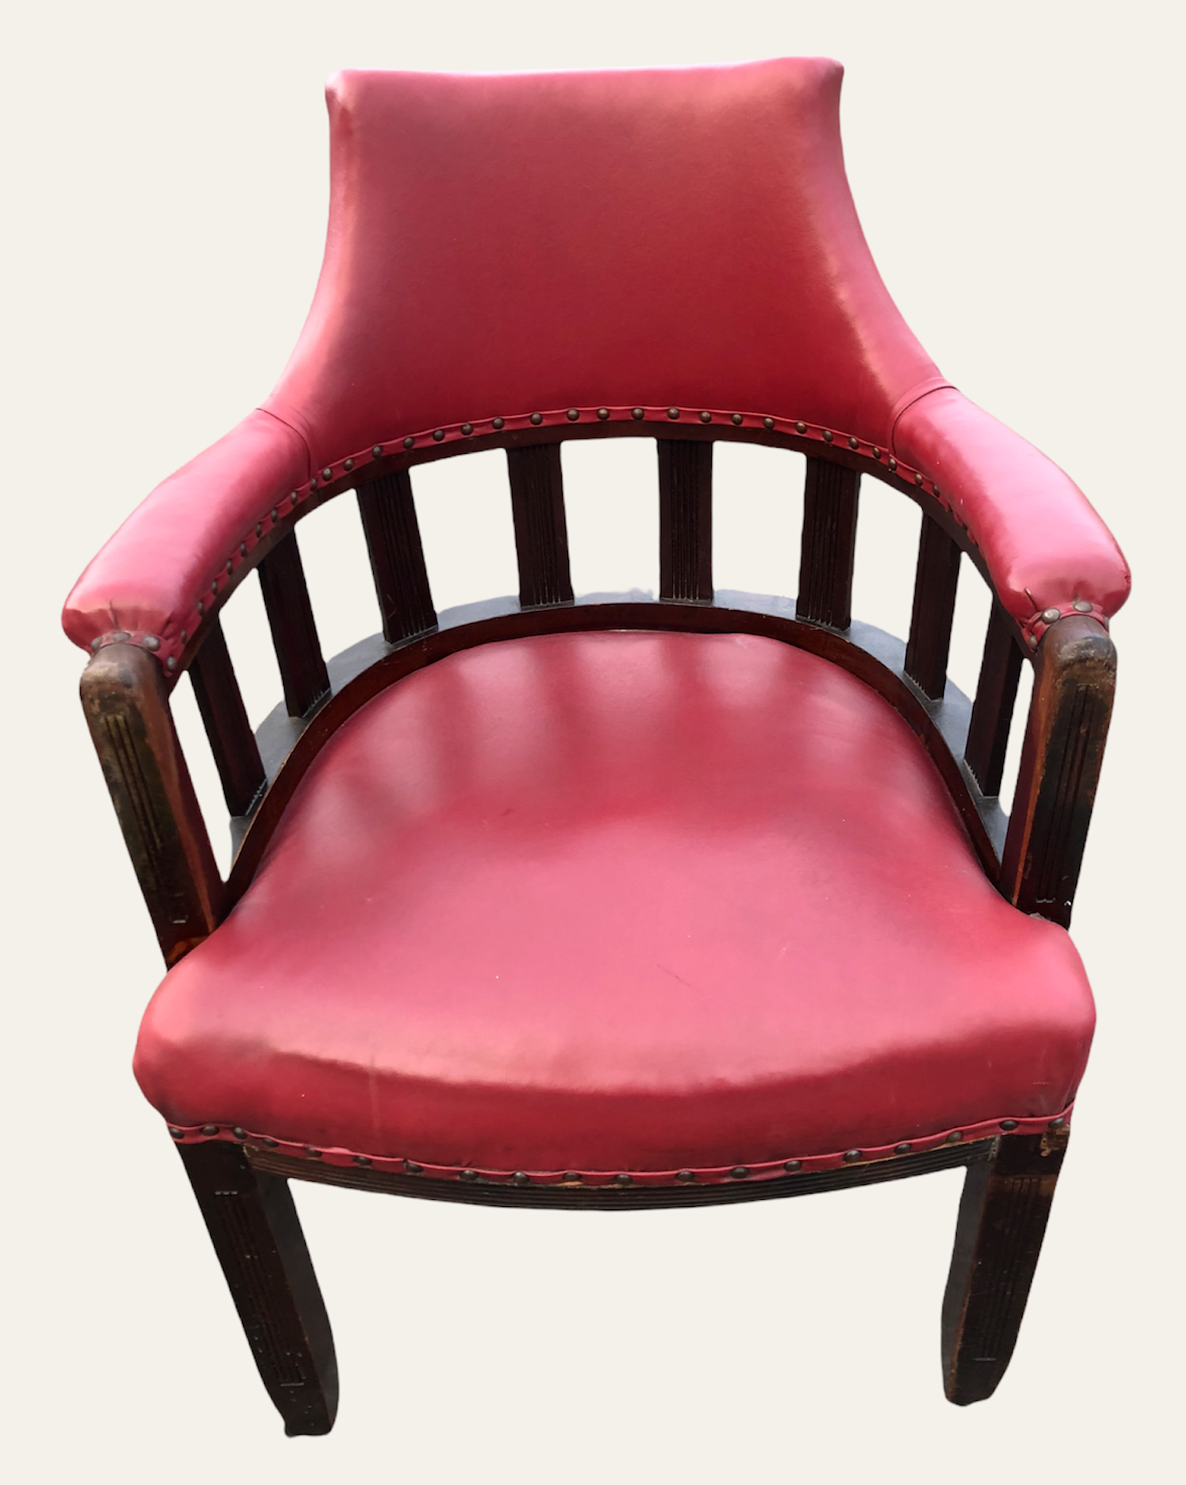 026.....Handsome Antique Mahogany Desk Chair ( sold )